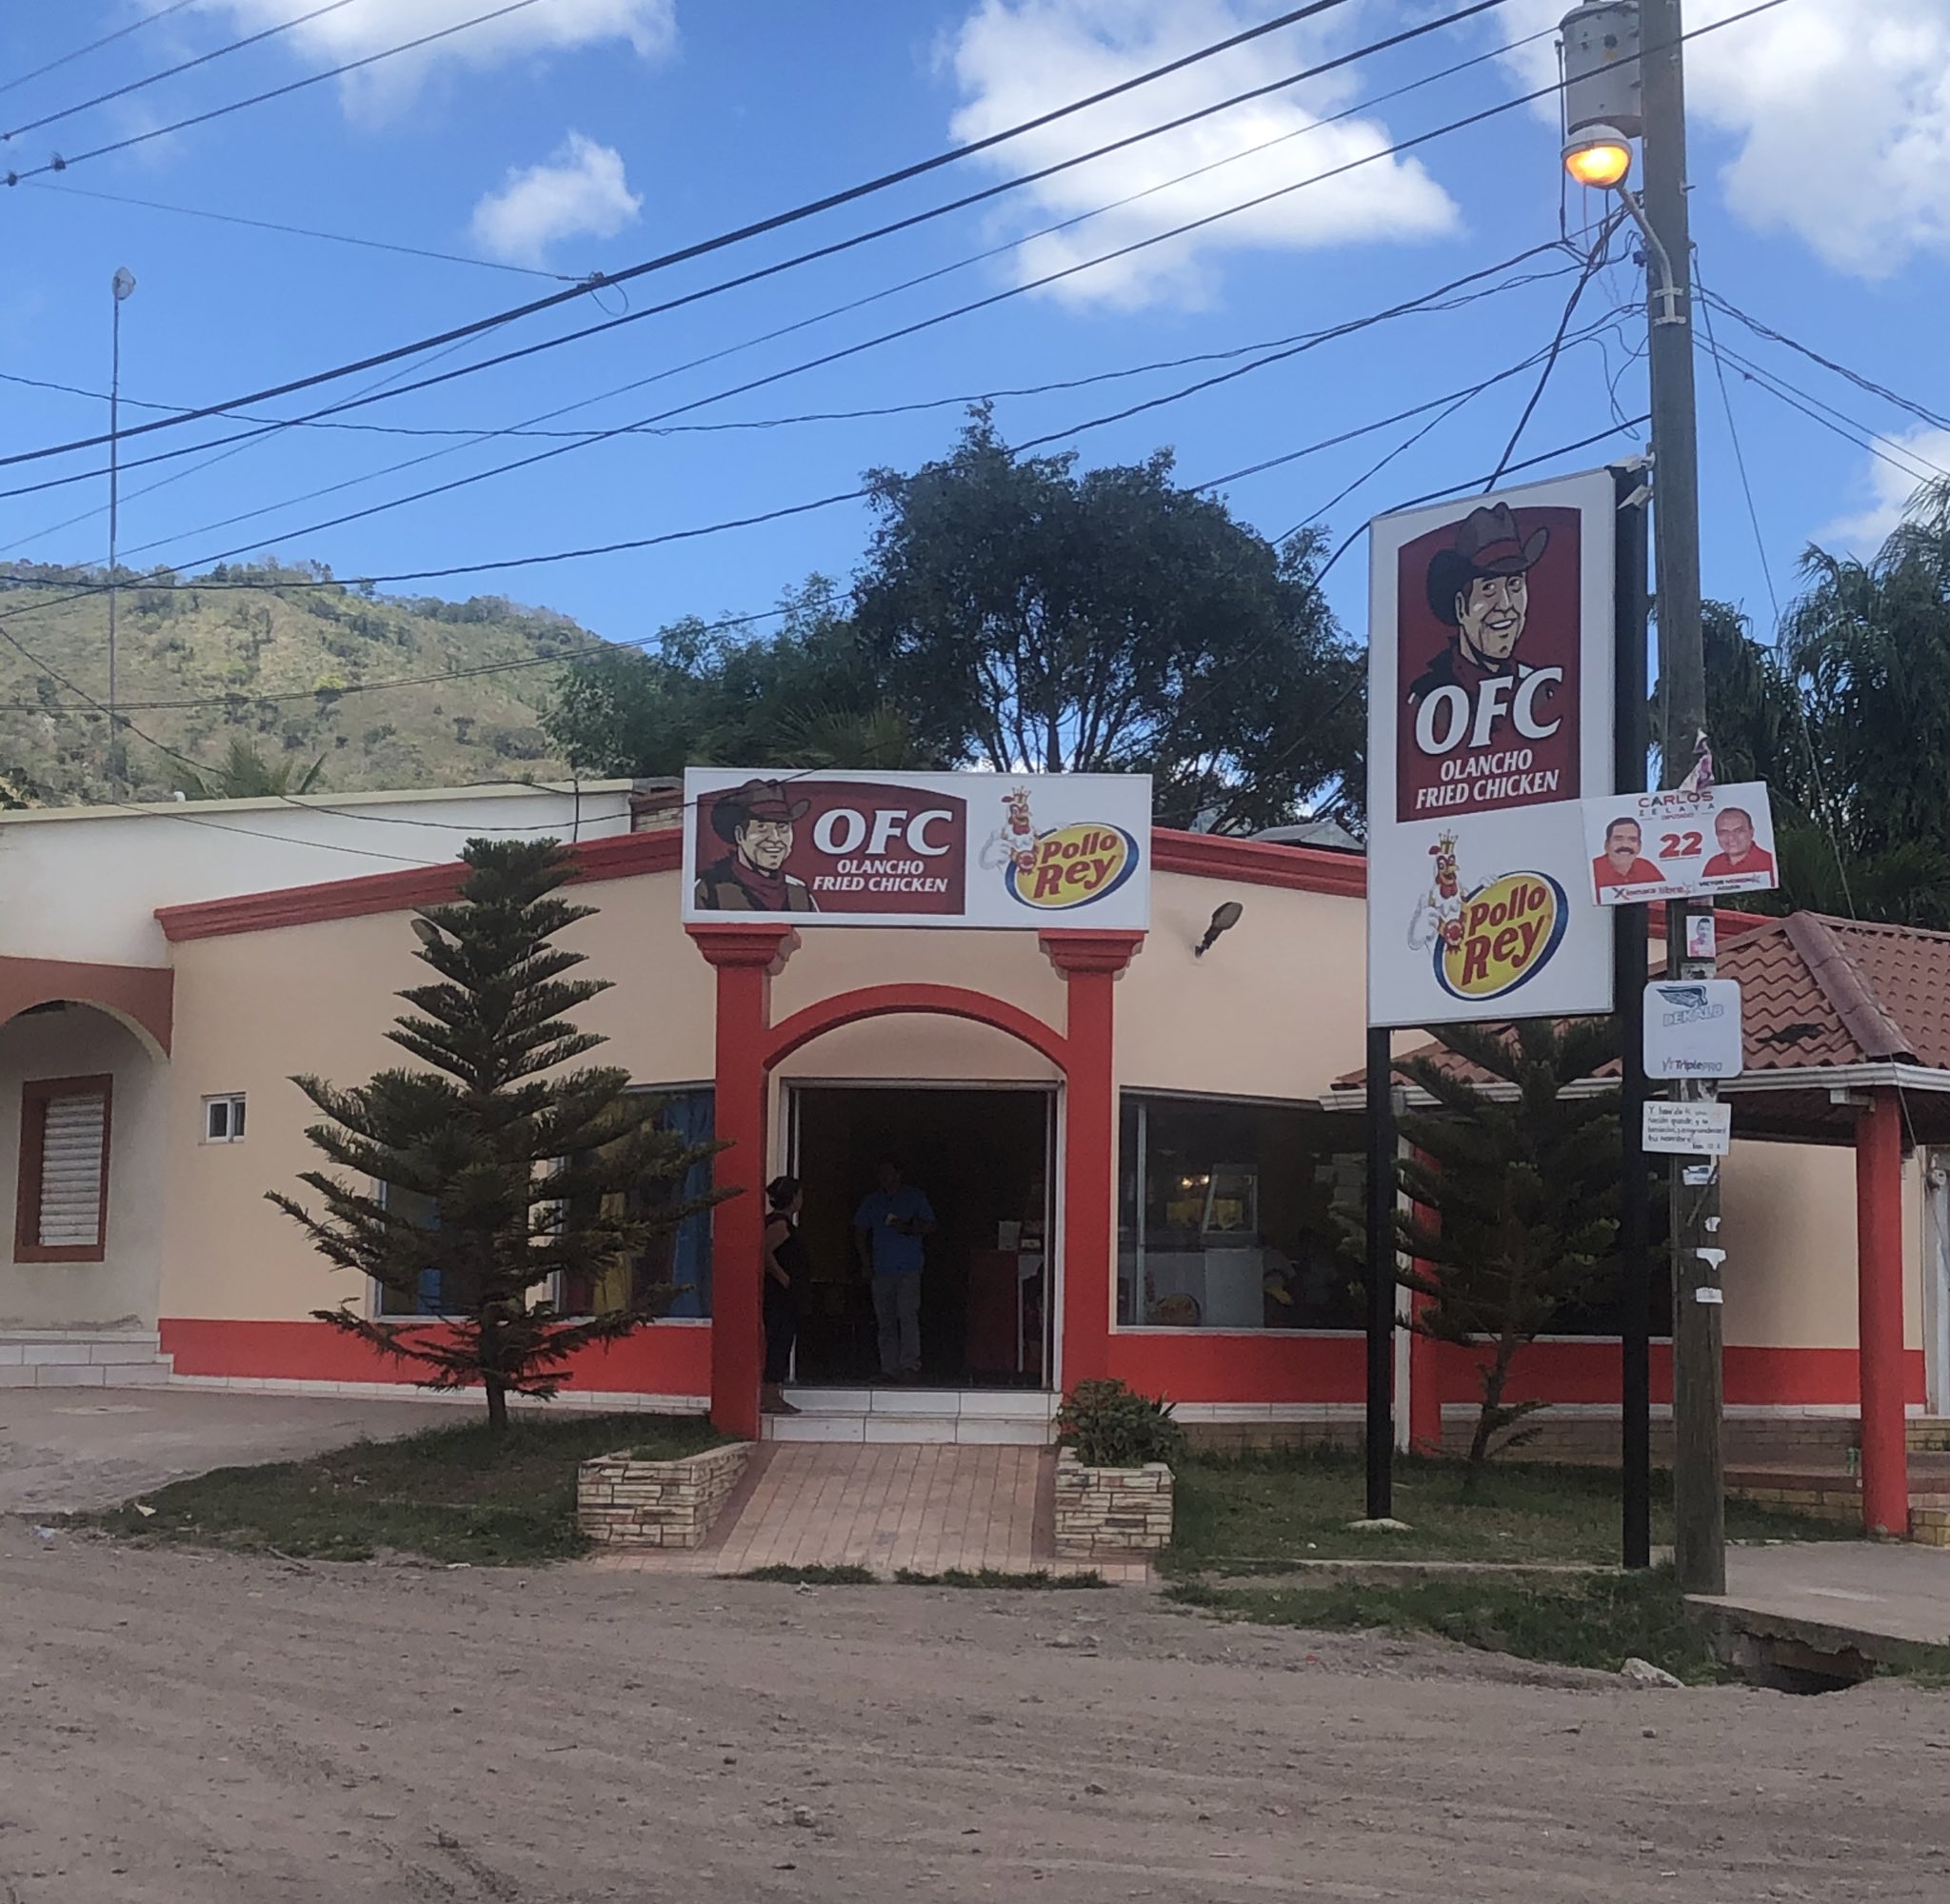 Luis Miguel Valle on Twitter: "Imagínense vivir en Suiza y no tener Olancho Fried Chicken. 😎😁 https://t.co/YGdf0pcq9S" / Twitter